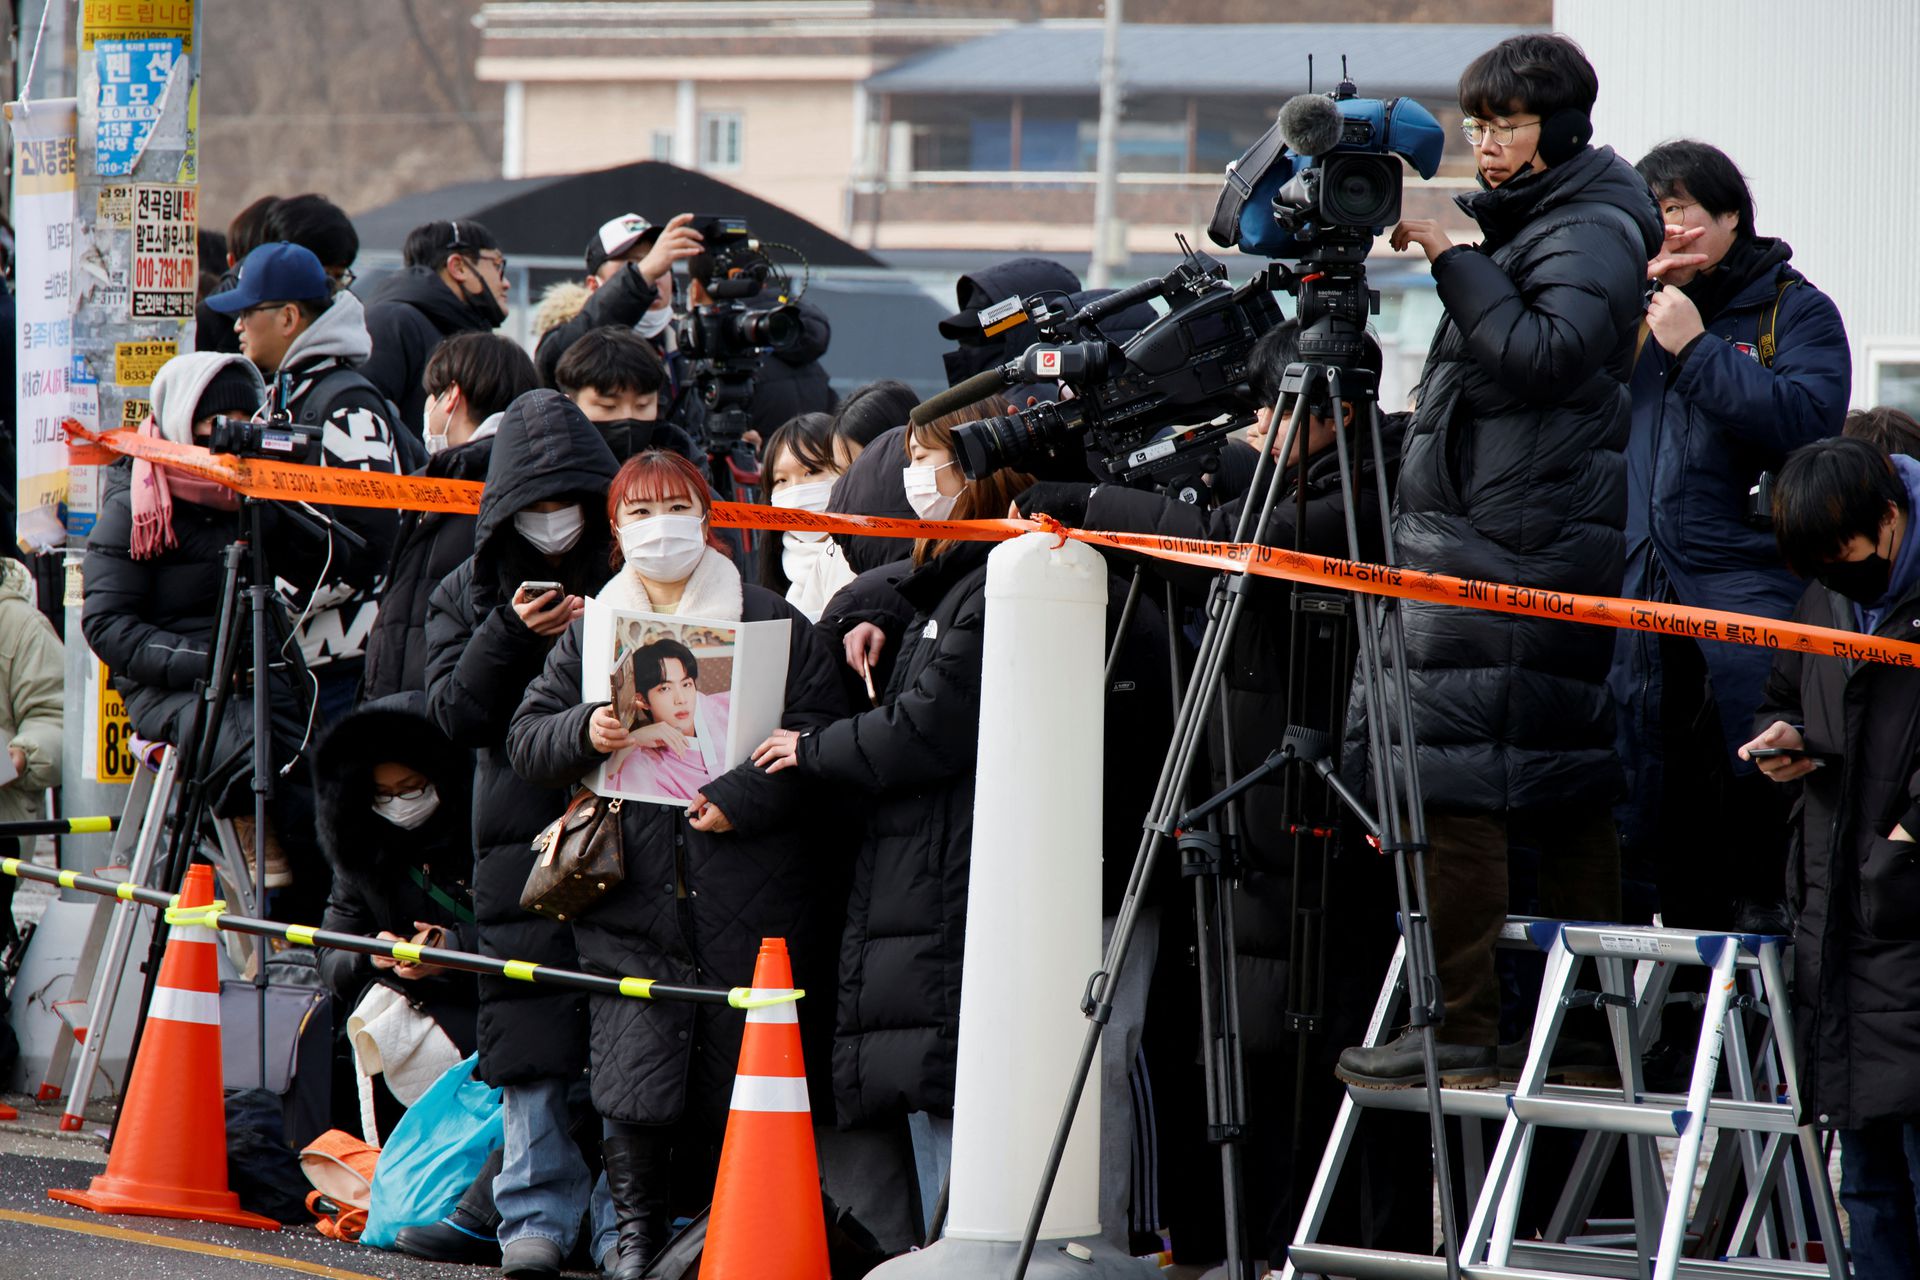 Fans and the media wait for the arrival of Jin, the oldest member of the K-pop band BTS, at a South Korean army boot camp near the demilitarized zone separating the two Koreas, in Yeoncheon, ROK, December 13, 2022. /CFP